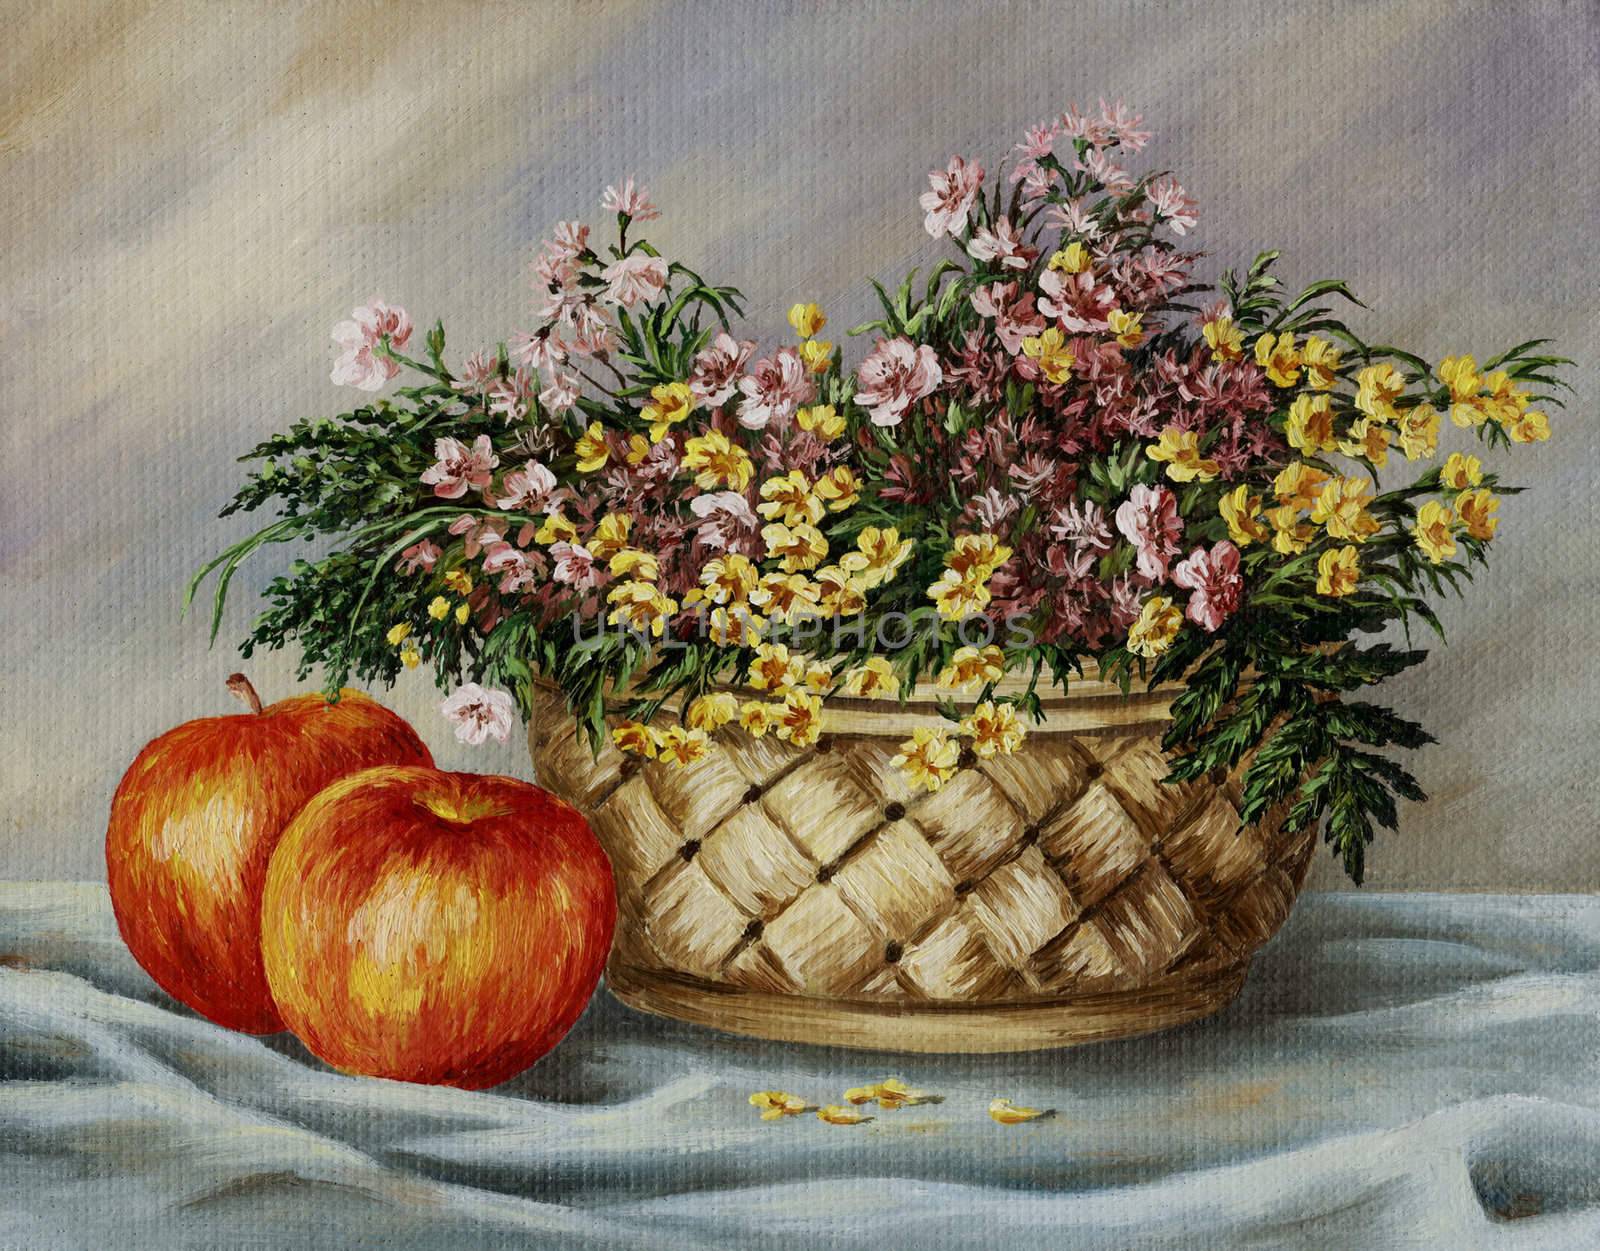 Basket with buttercups and apples by alexcoolok